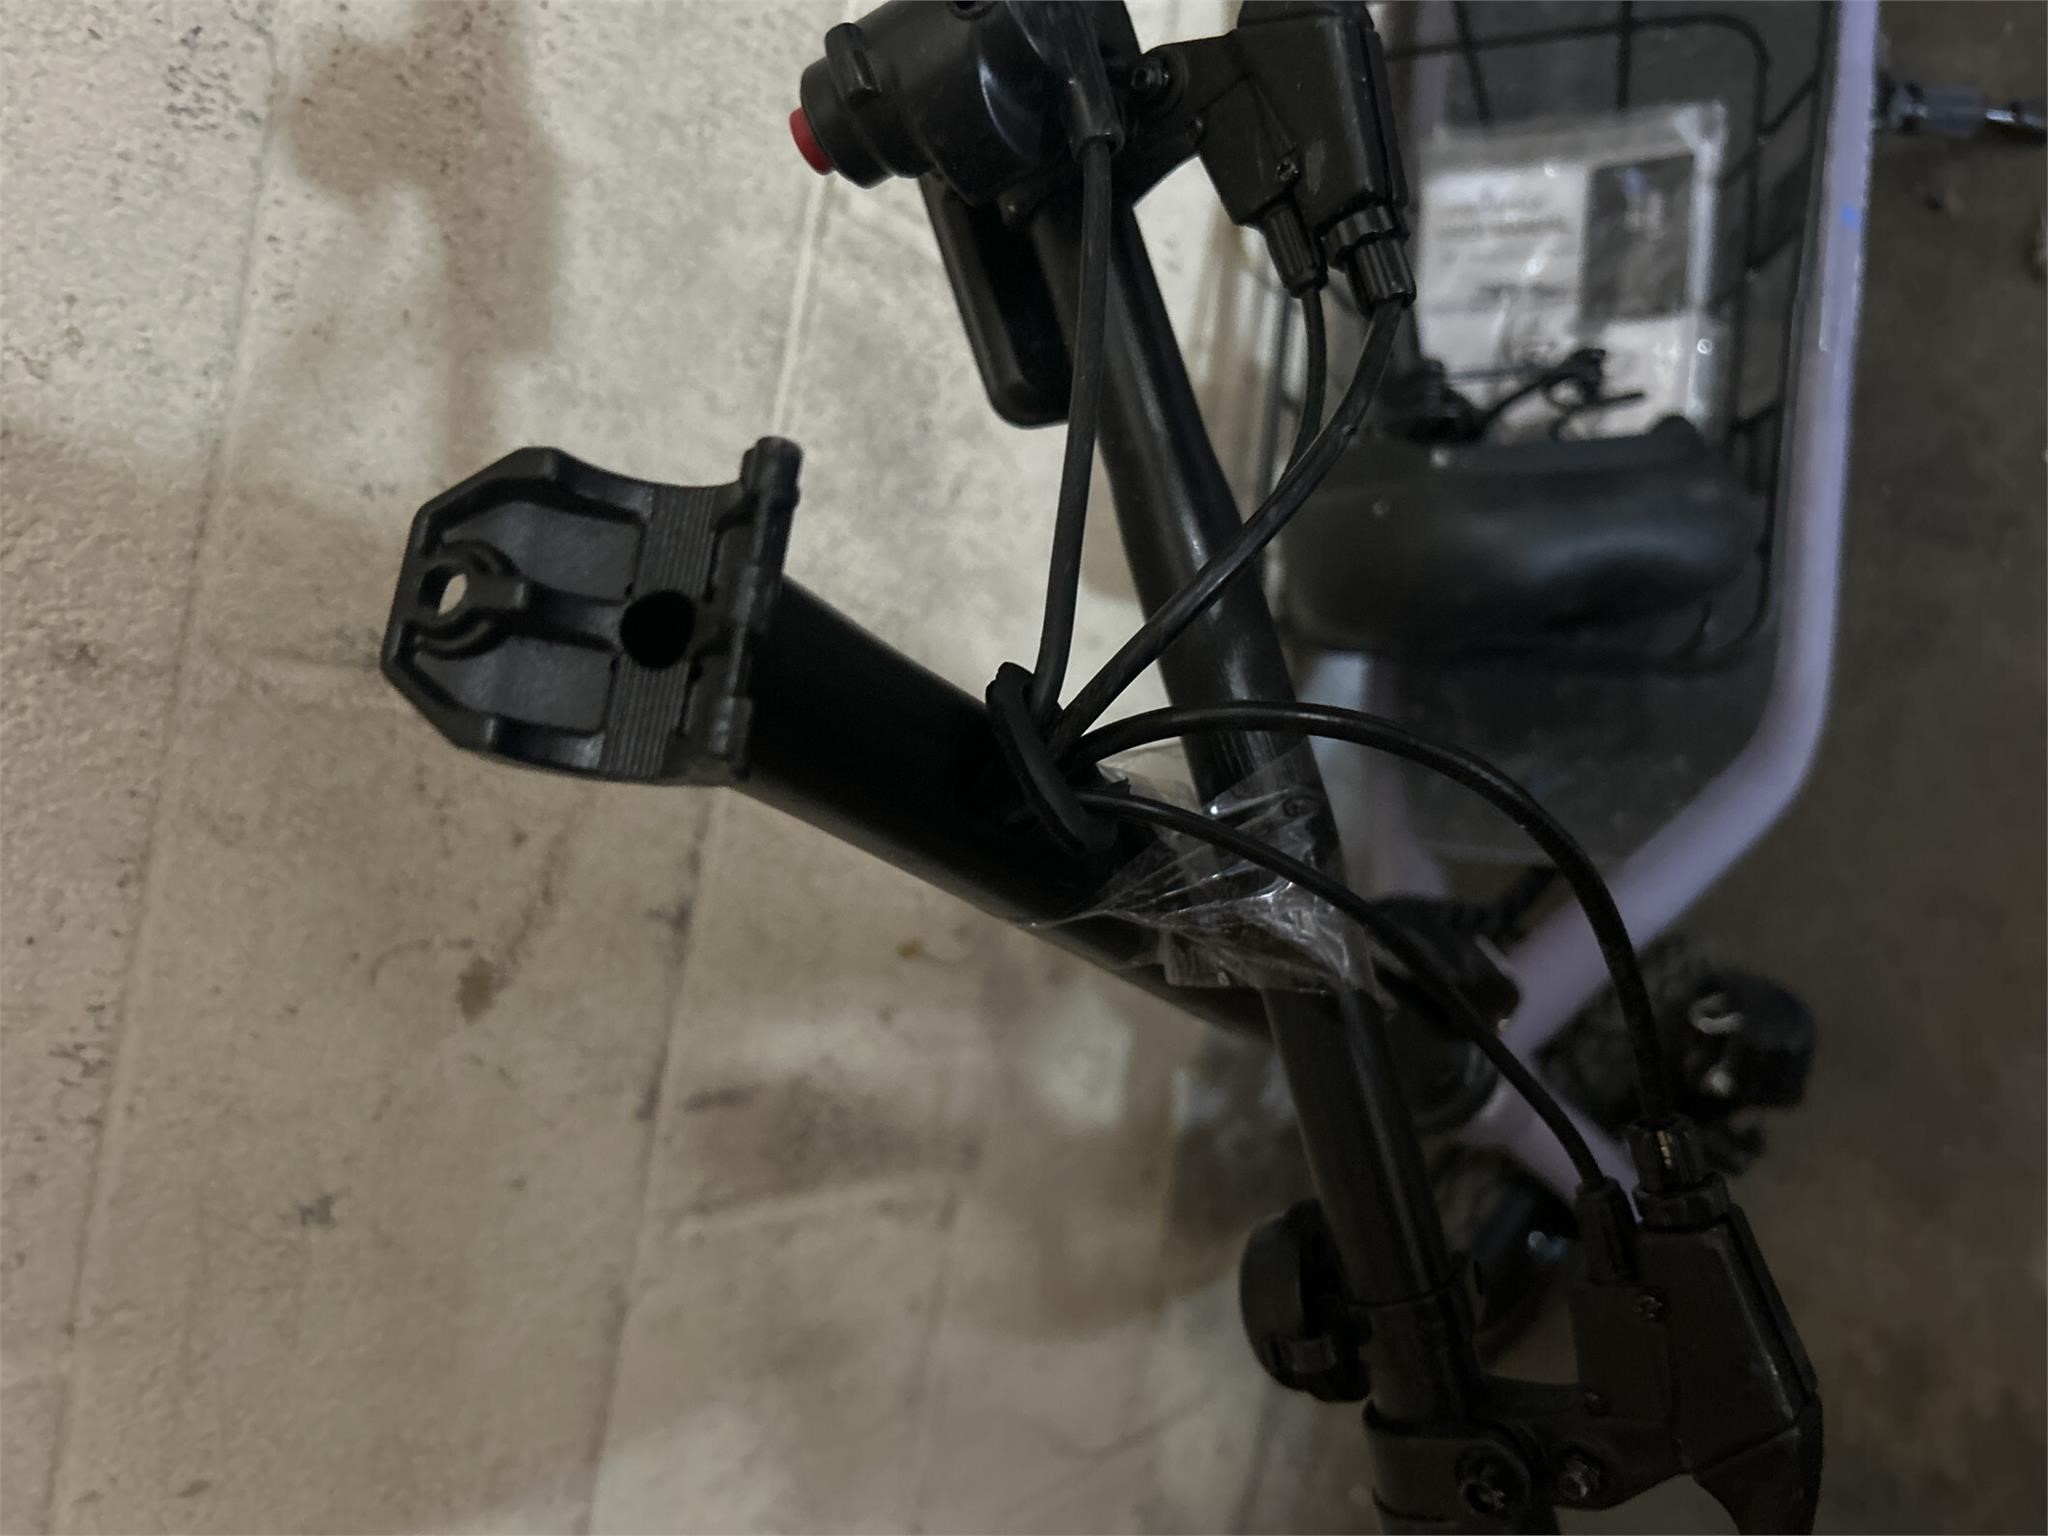 URBANMAX C1 Electric Scooter